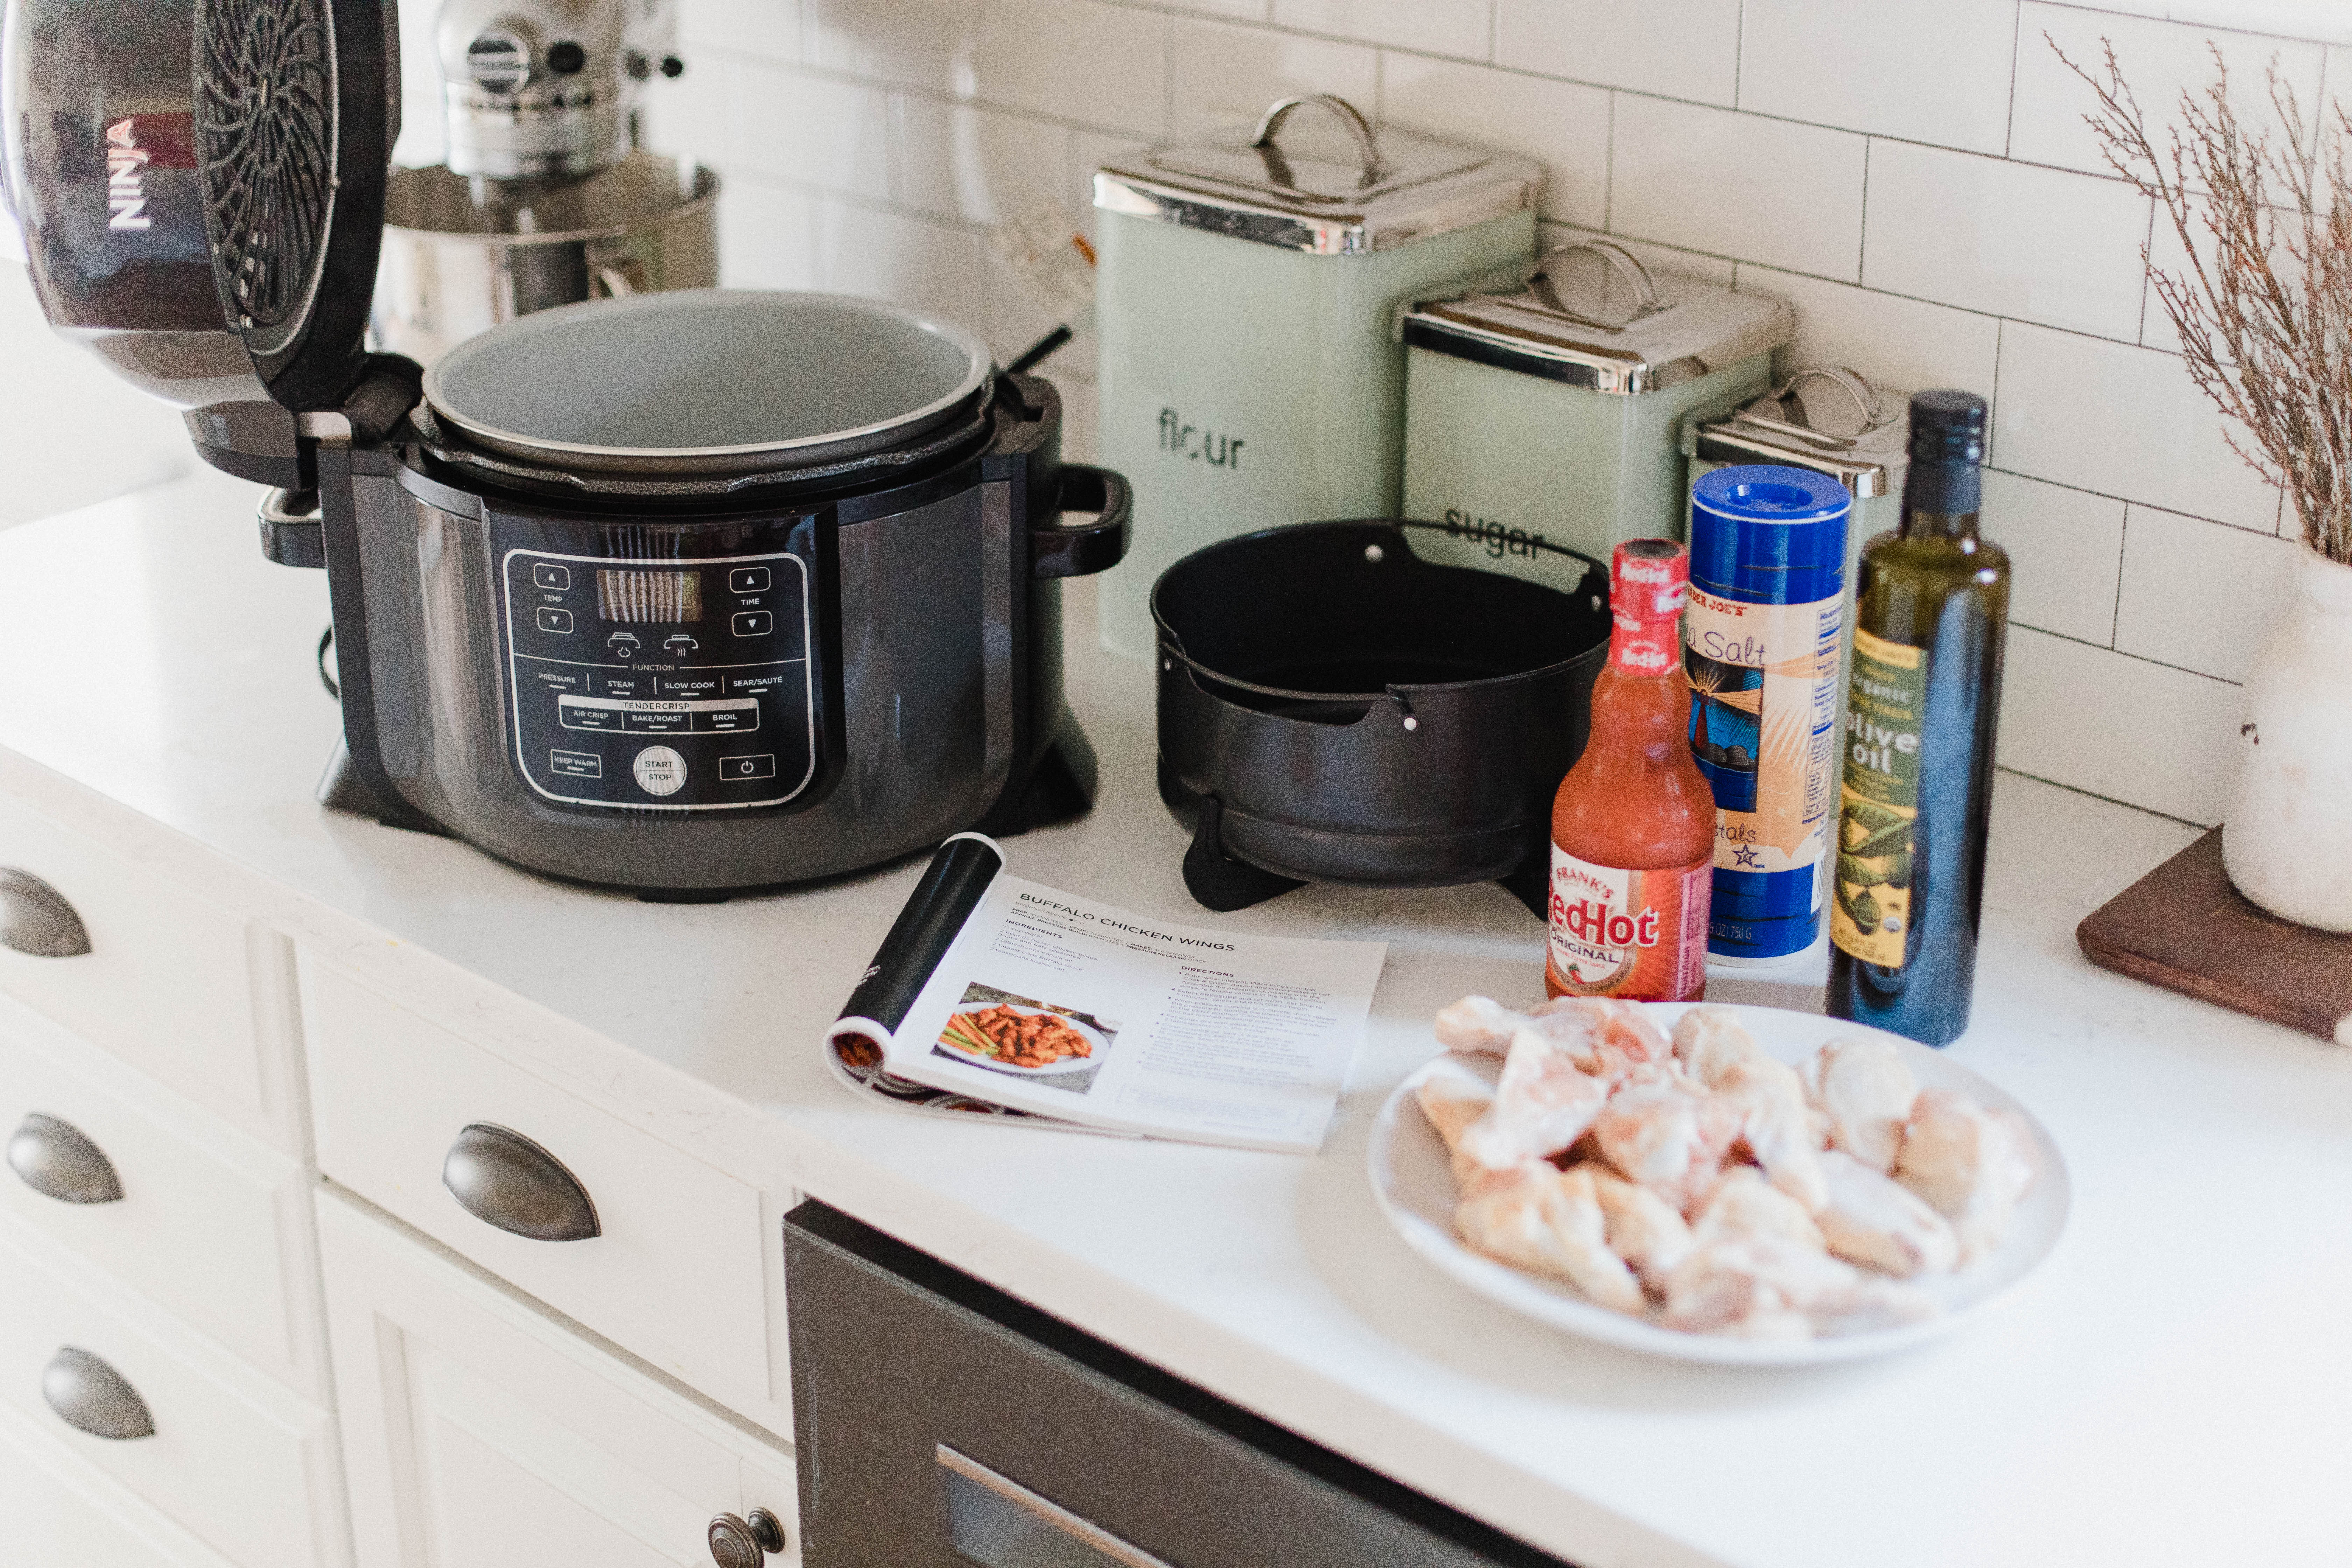 Connecticut life and style blogger Lauren McBride shares her paleo hot wing recipe using the Ninja Foodi two in one pressure cooker and air fryer.